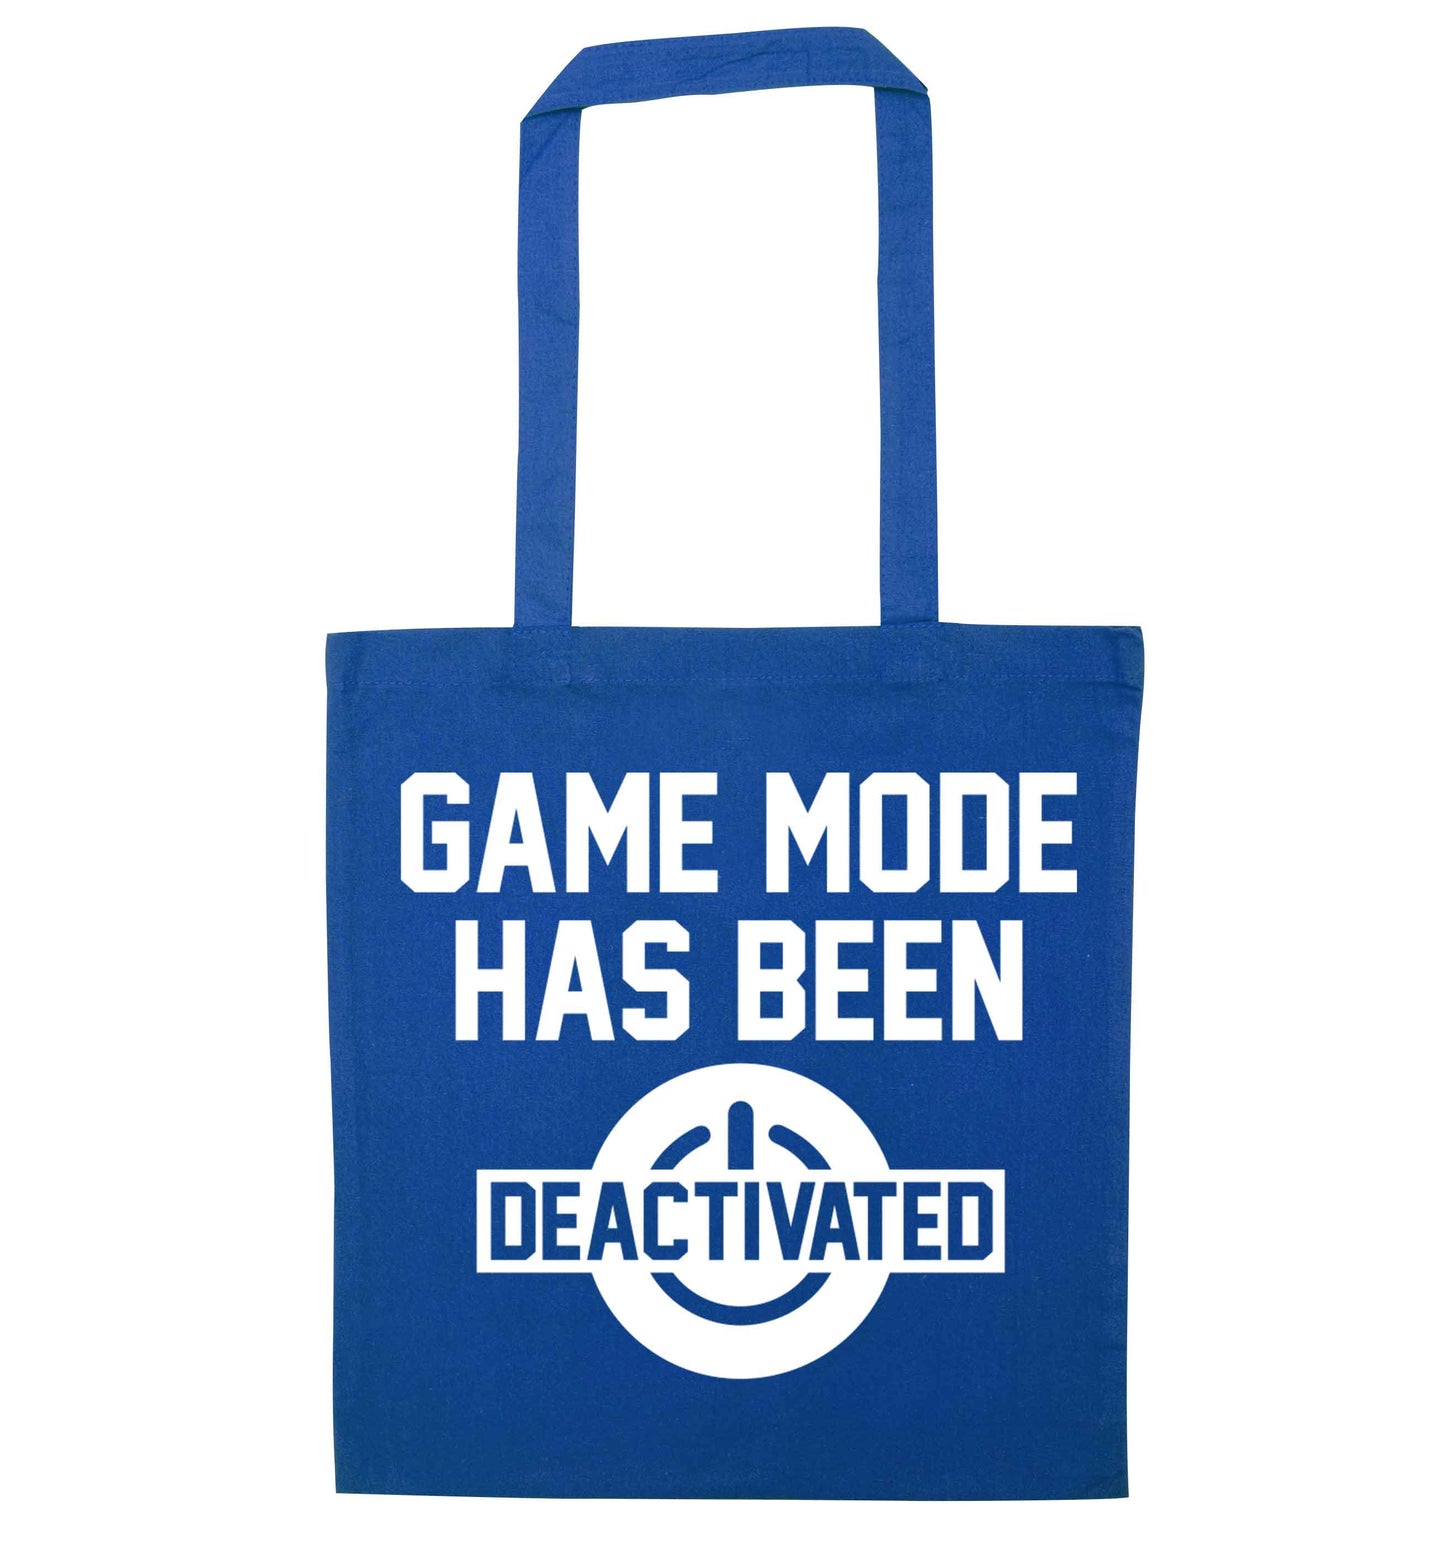 Game Mode Has Been Deactivated blue tote bag